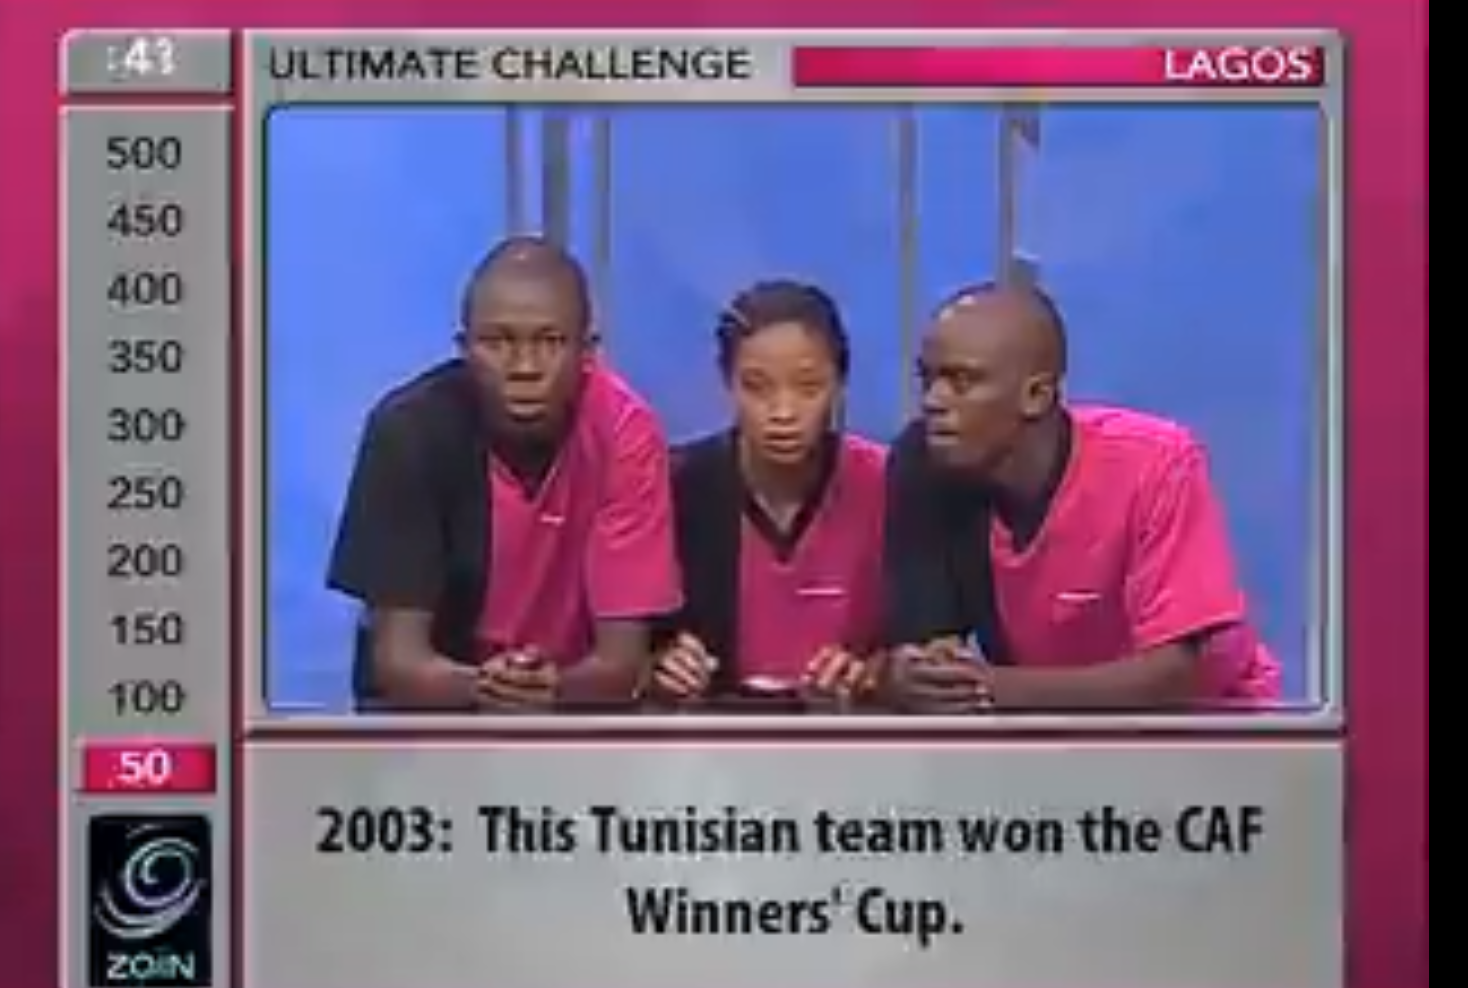 Before the CAF cup was changed to the CAF confederation cup, which Tunisian team won it?